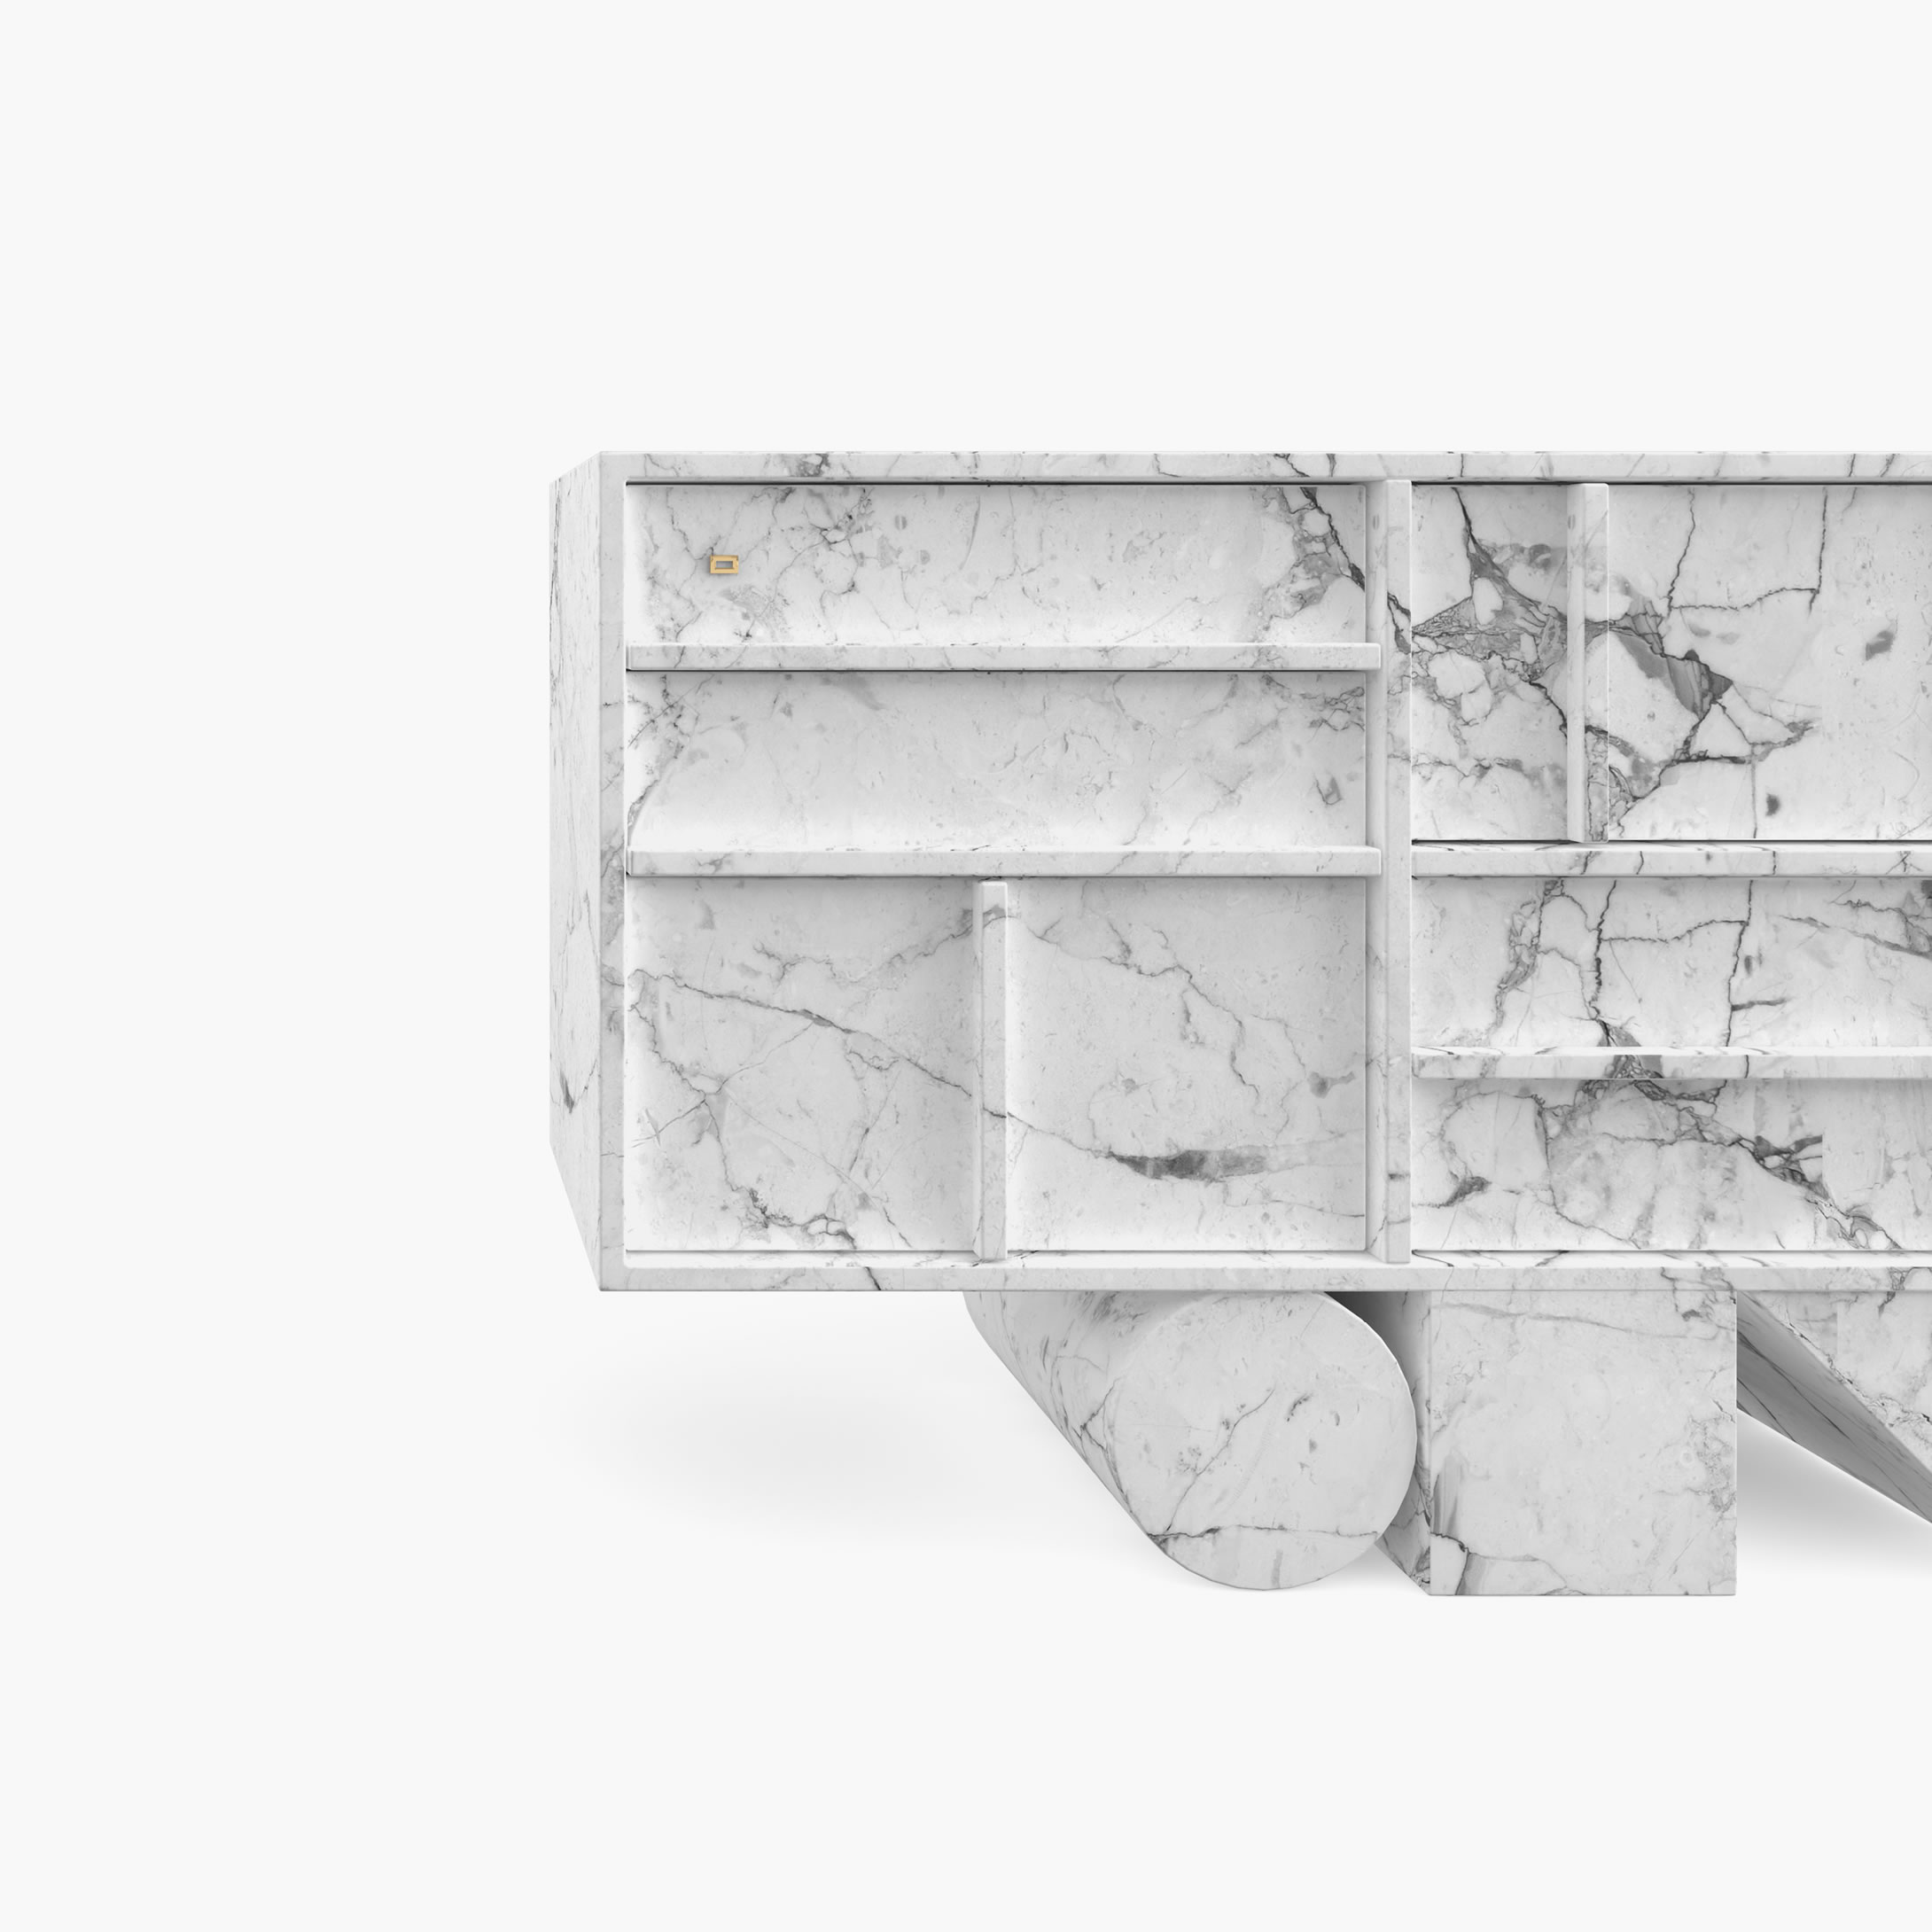 Sideboard Cylinder cuboid prism White Arabescato Marble collectible Living Room designs Consoles  Sideboards FS 13 FELIX SCHWAKE